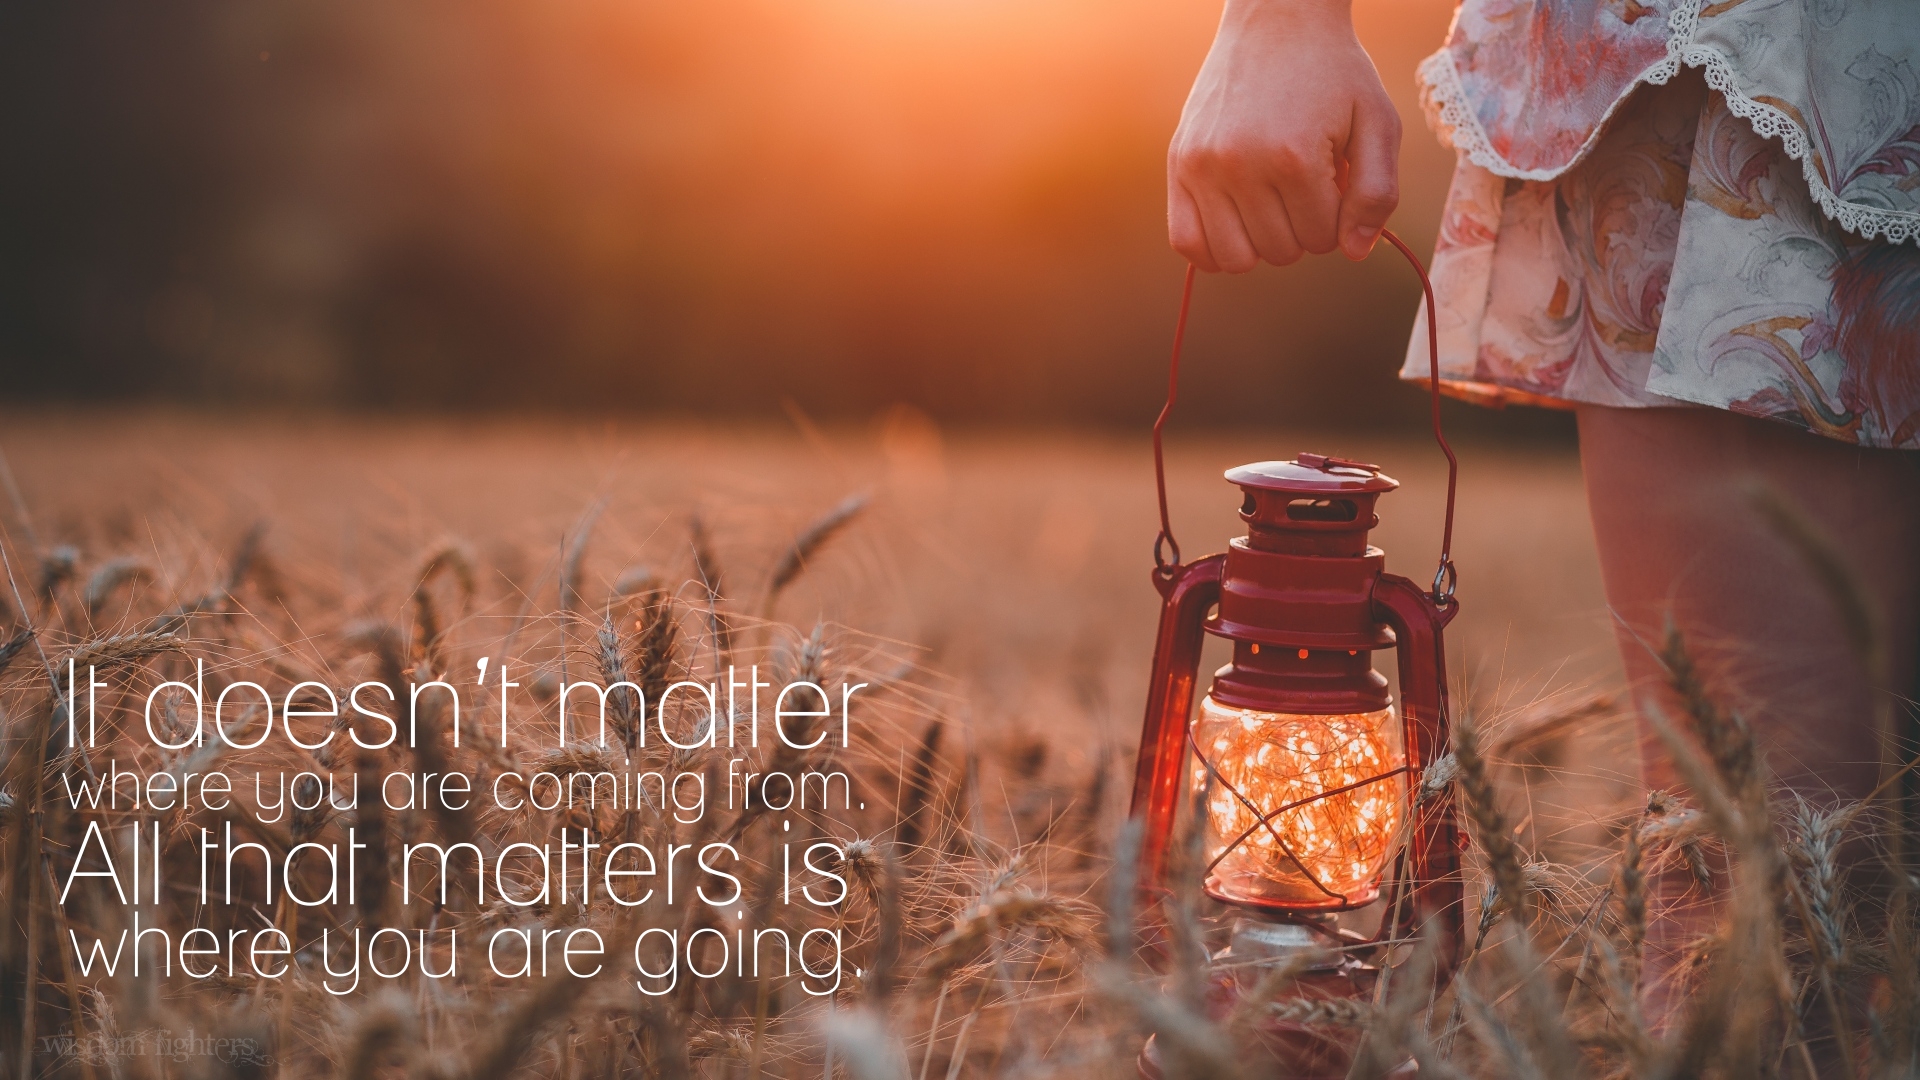 It doesn't matter where you are coming from. All that matters is where you are going